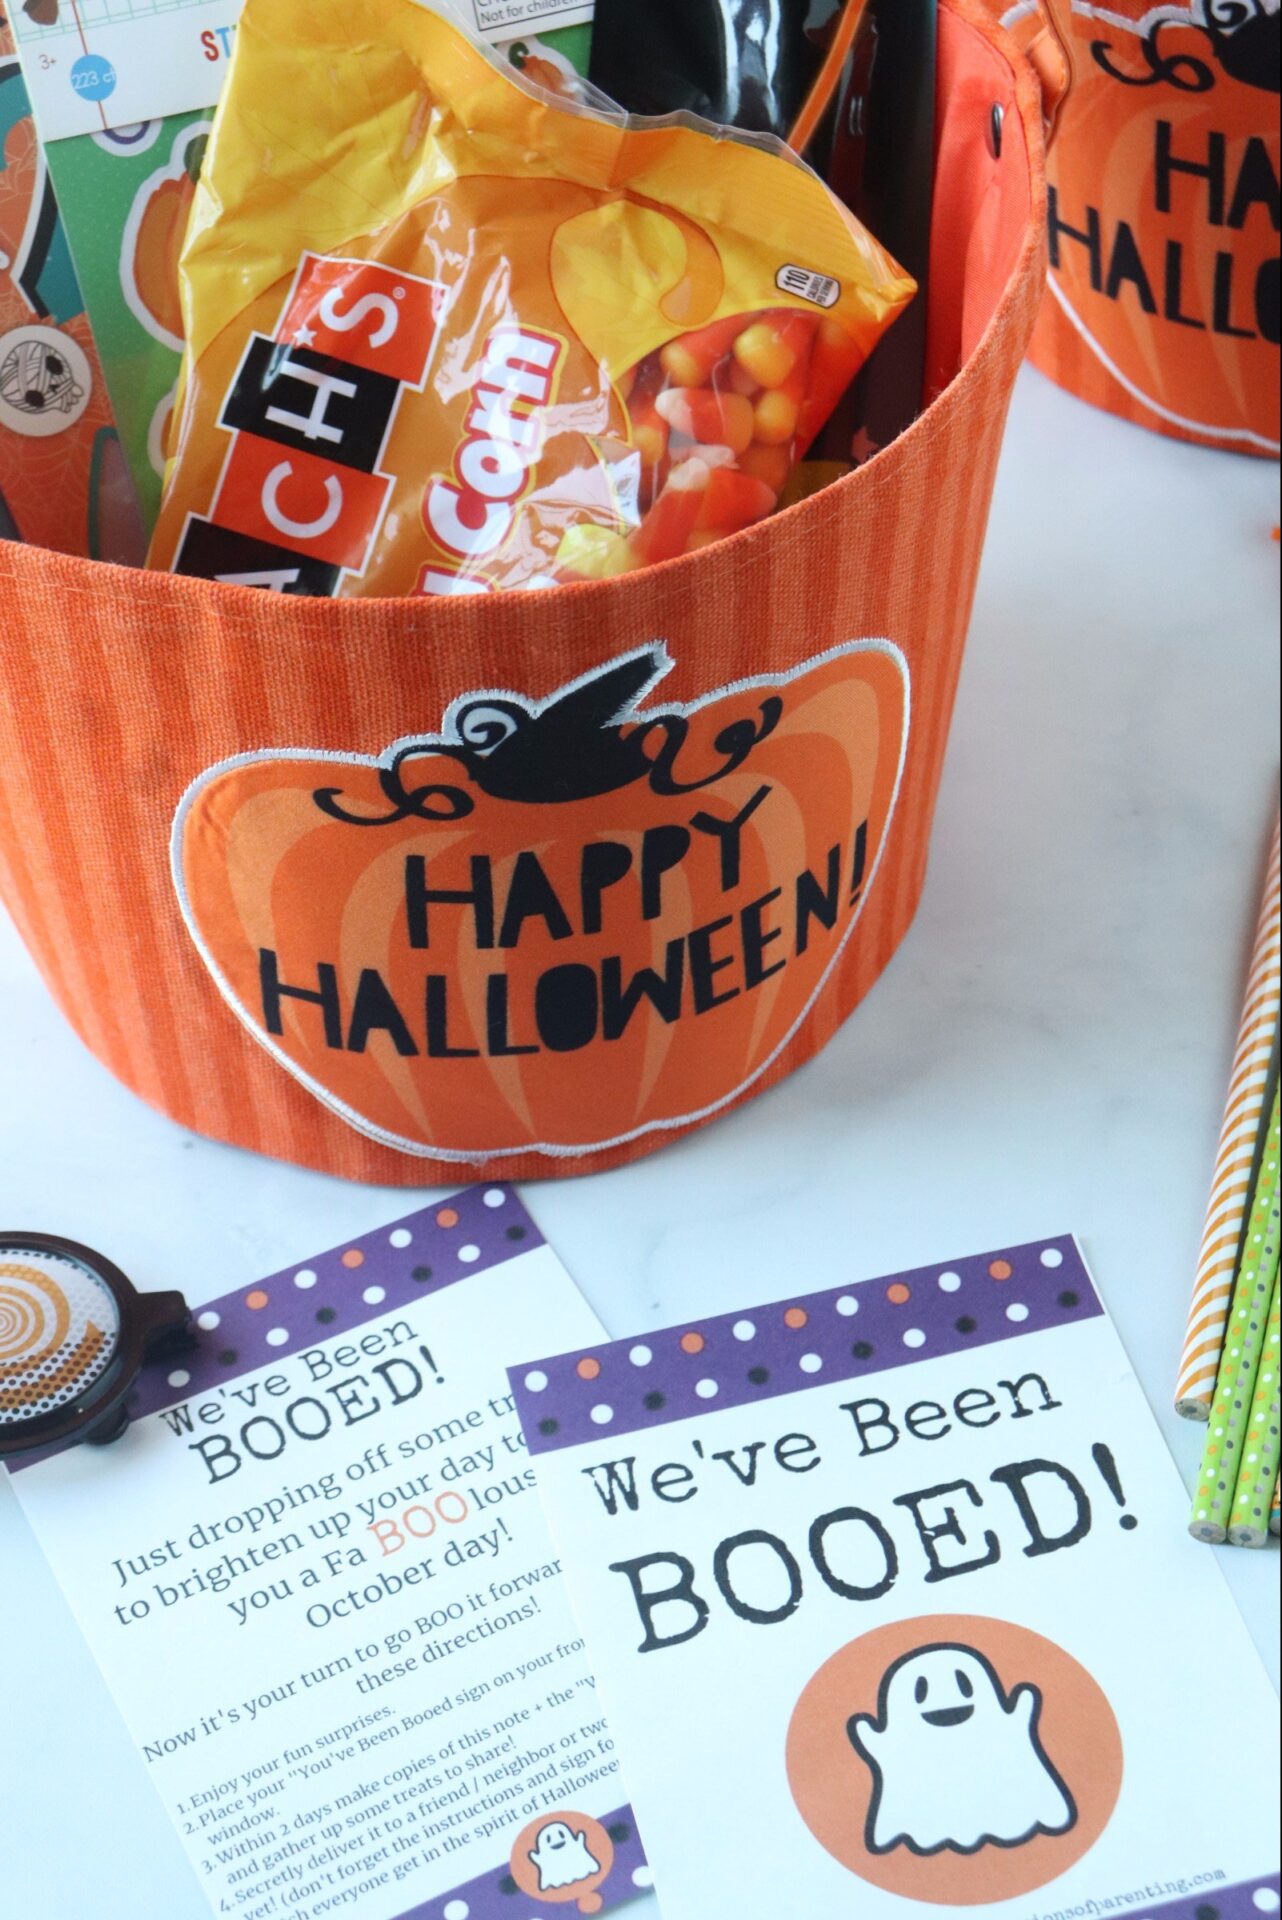 Grab some treats and put on your running shoes as you and your family share the magic of Halloween as you go around dropping “You’ve been booed” surprises!